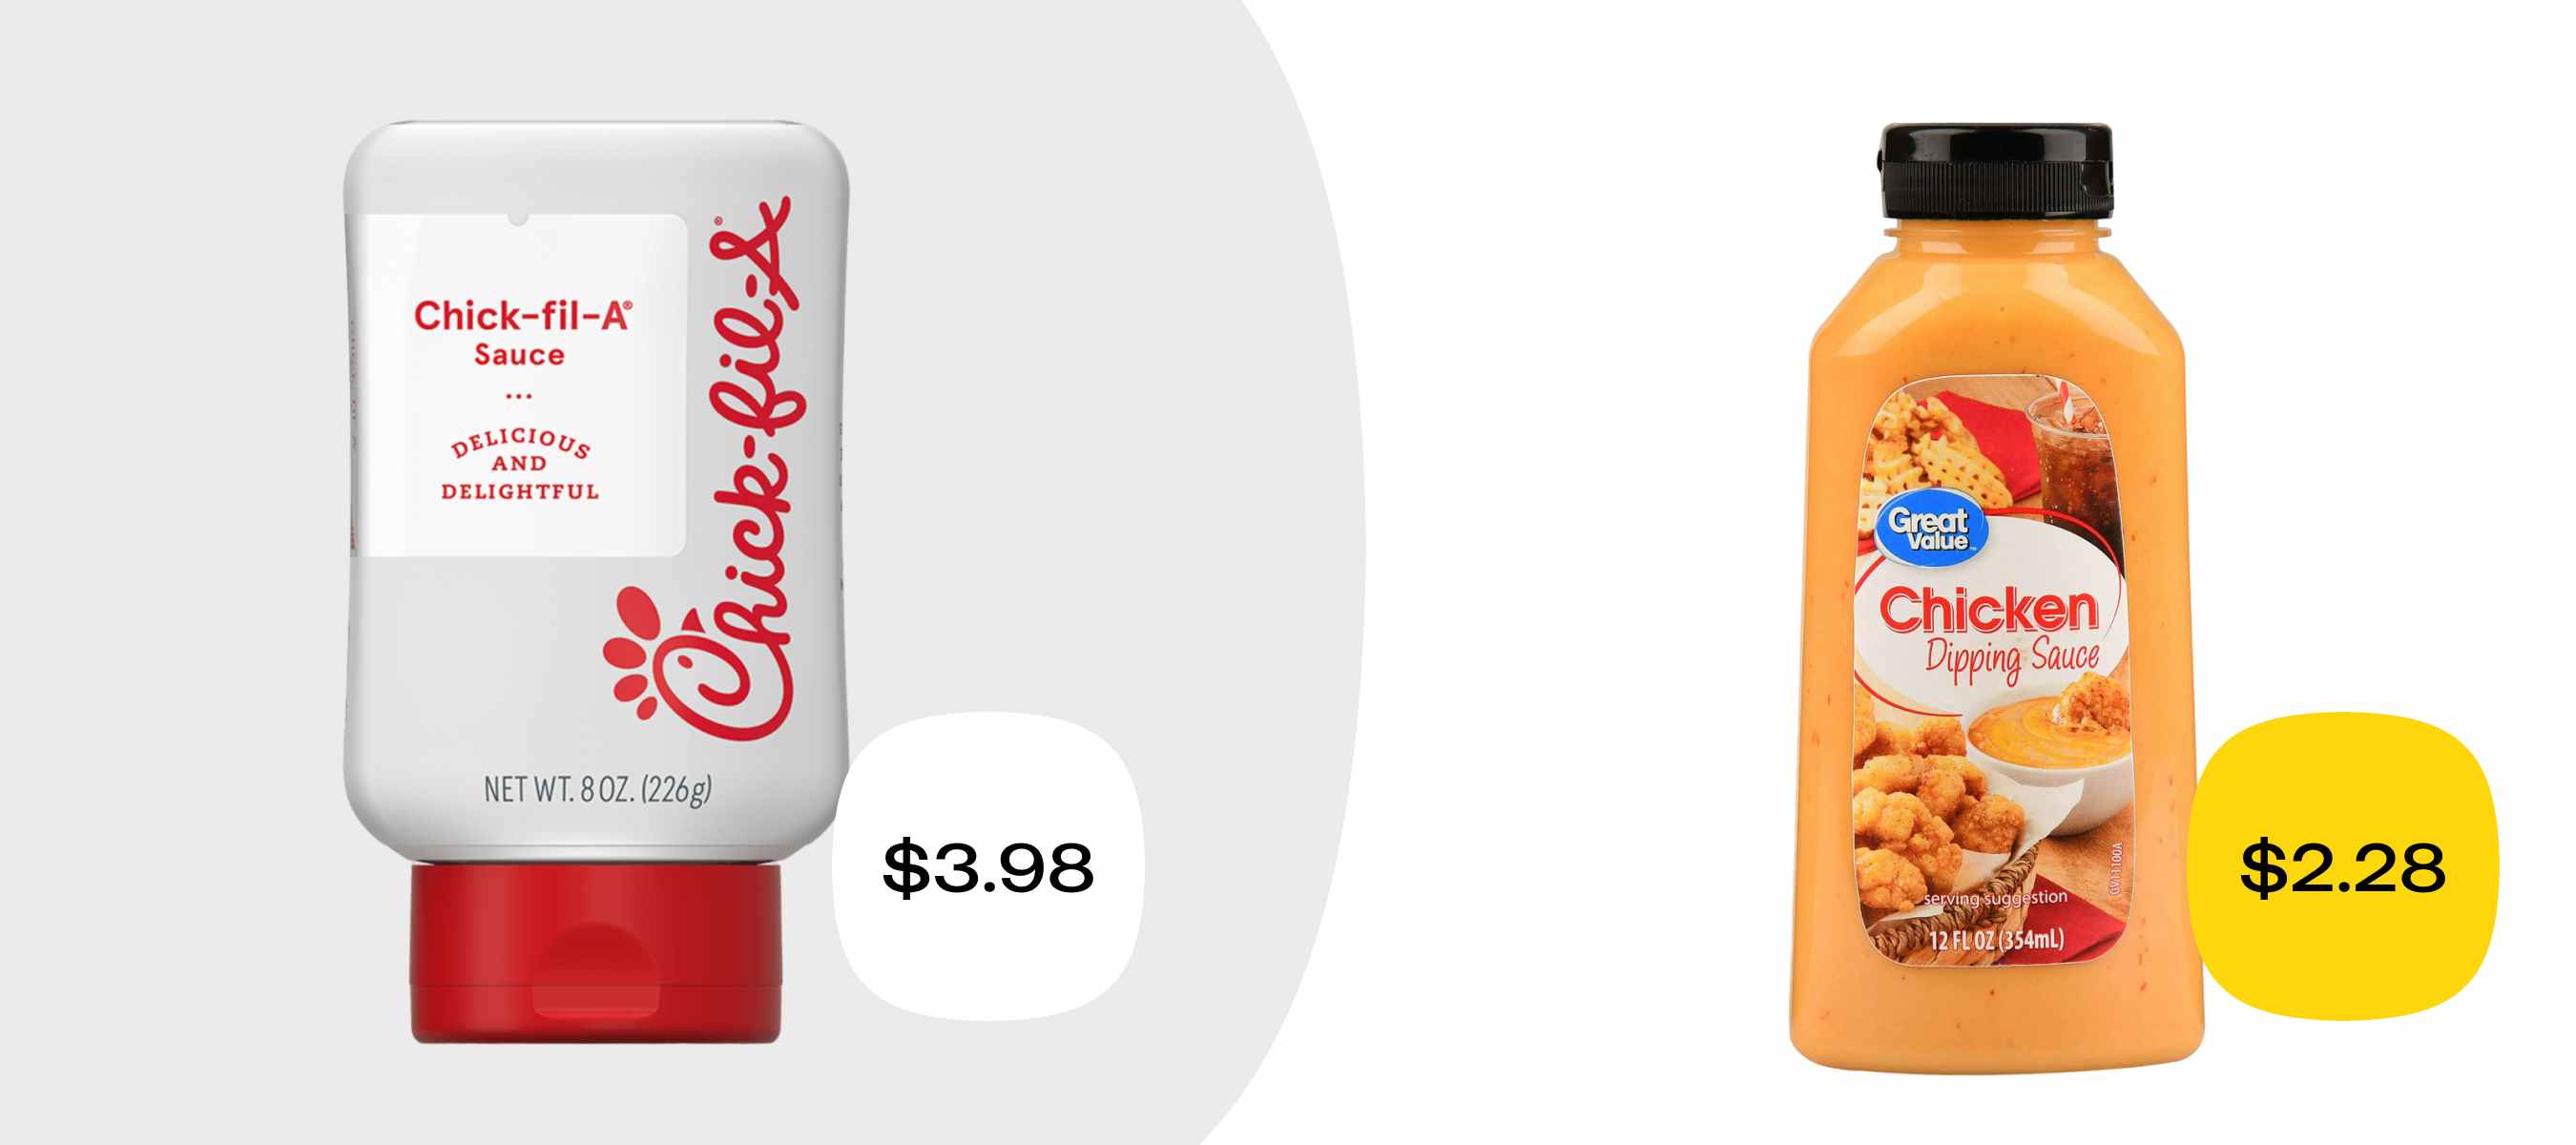 chick fil a sauce for $3.98 versus a similar product from walmart for $2.28